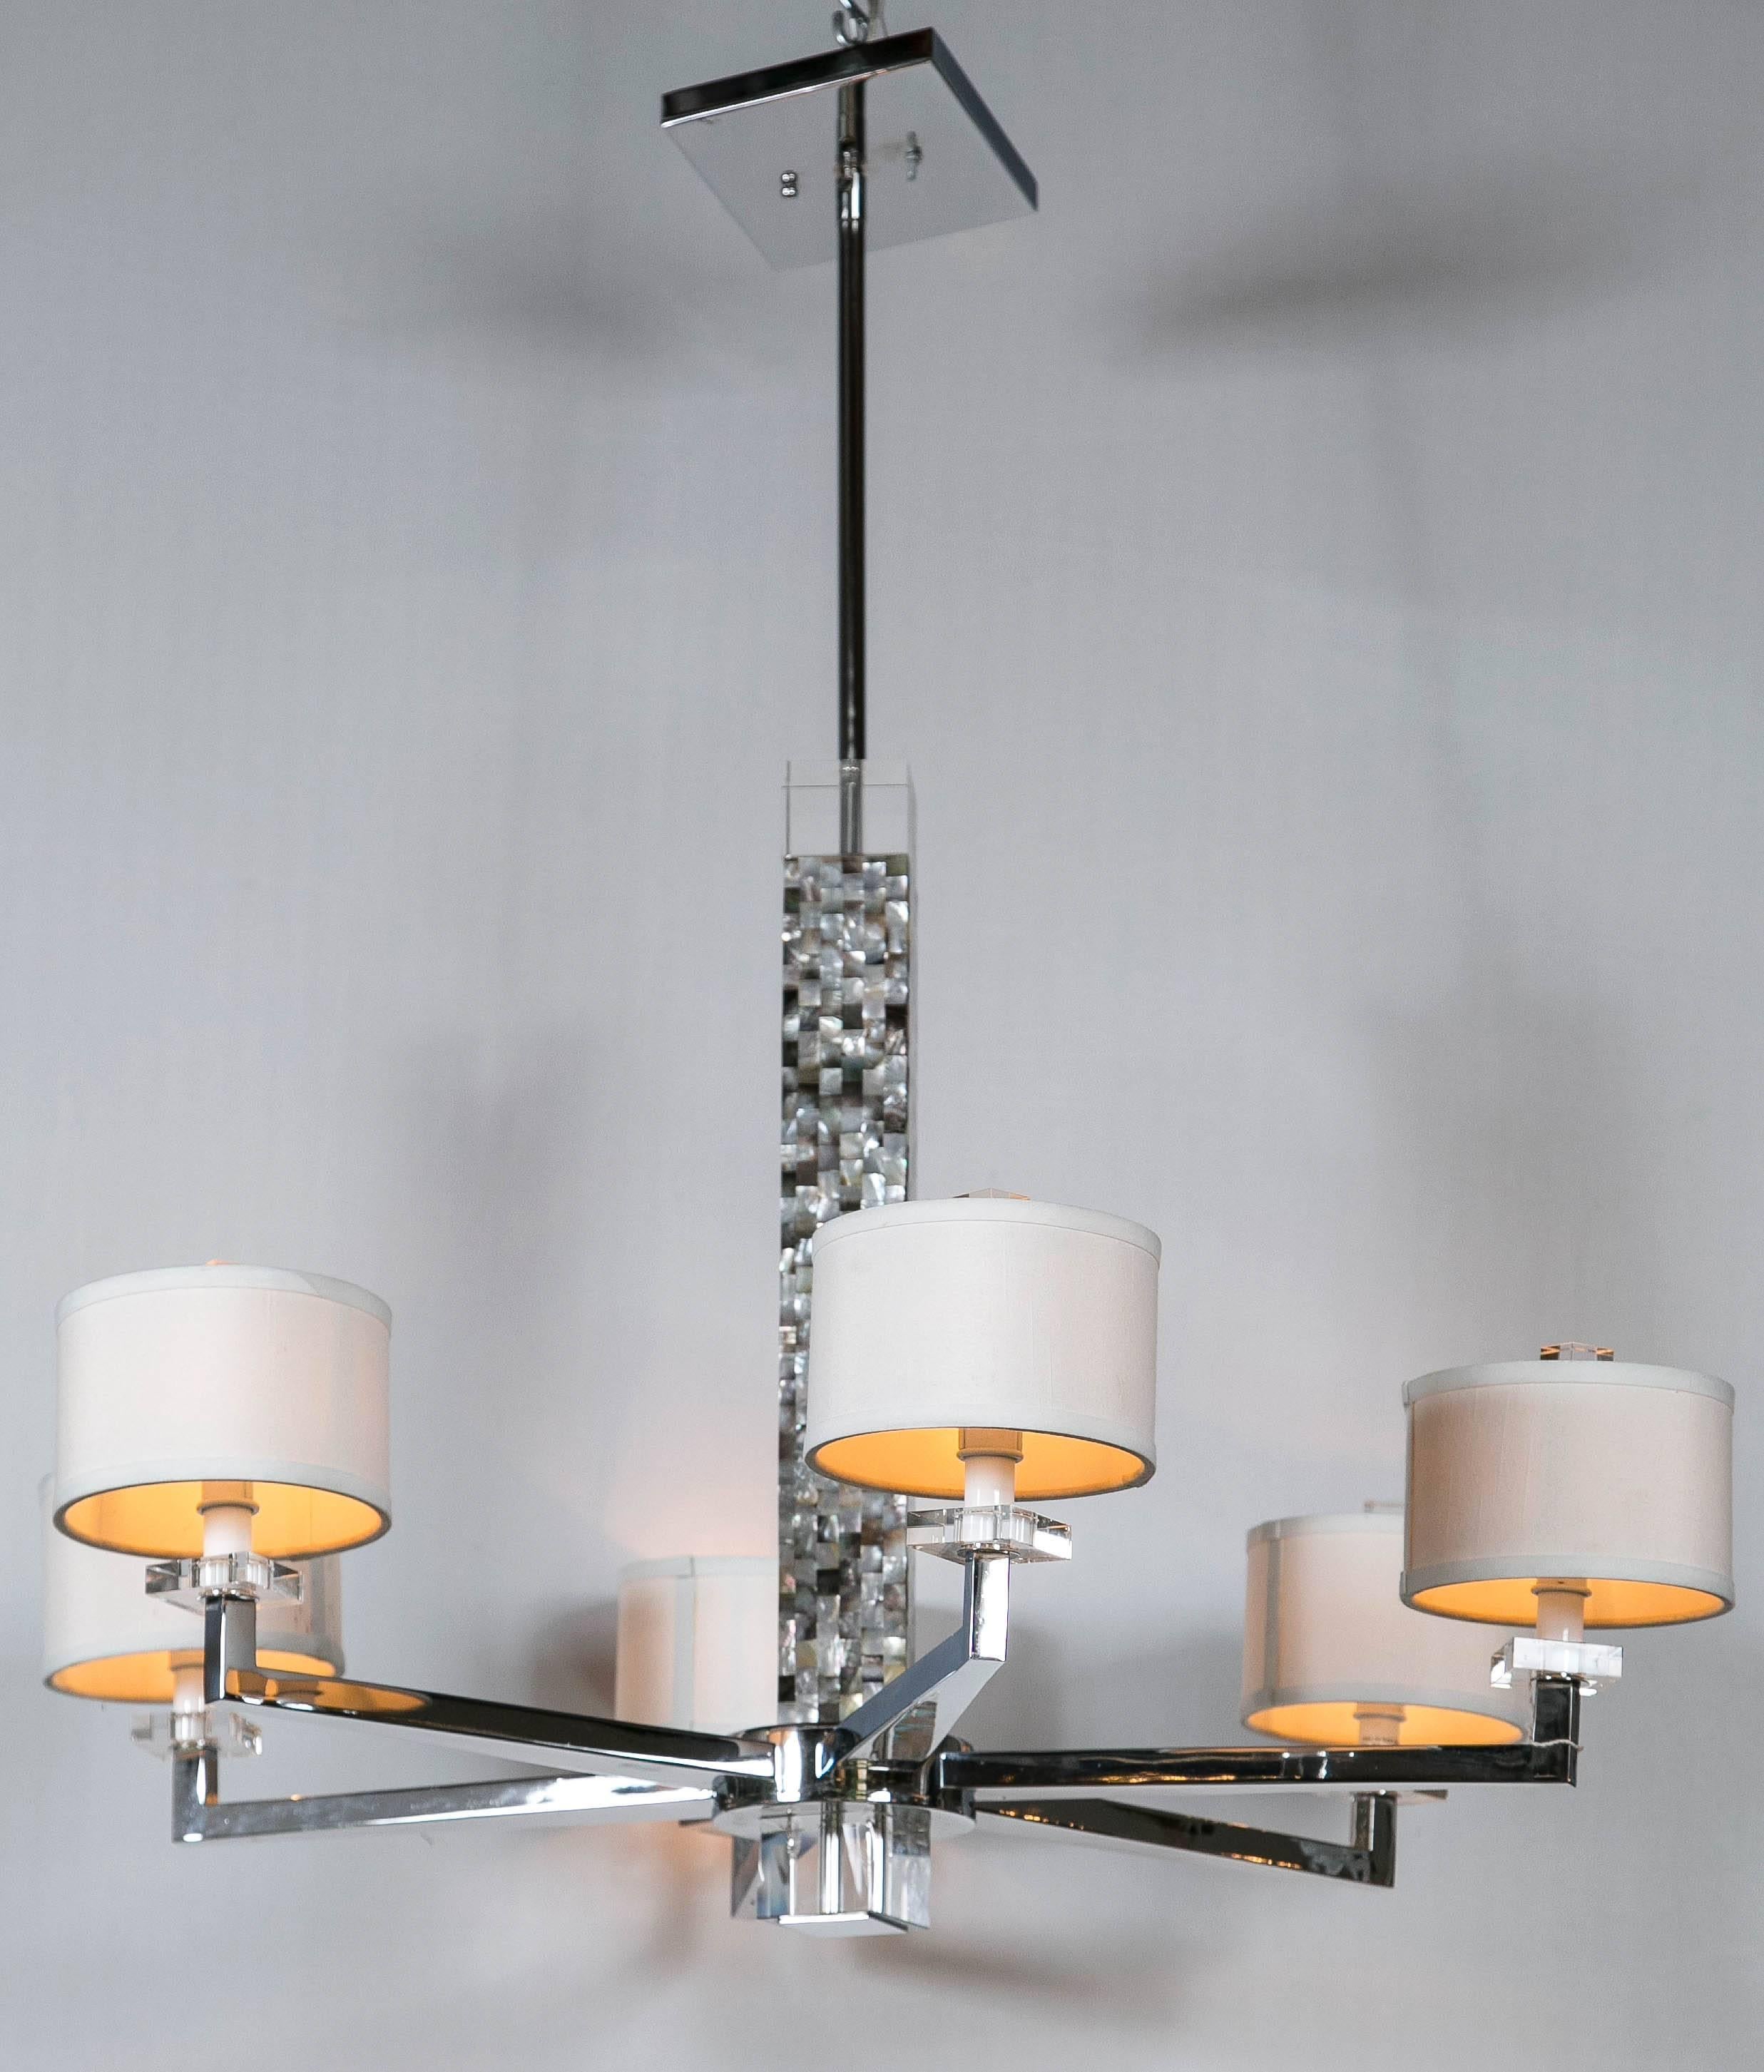 A mother-of-pearl Micro mosaic decorated chandelier. The chrome six-light fixture having circular shades supported by a Micromosaic style center square support. Newly wired. This is a part of our recently expanded lighting section featuring hundreds